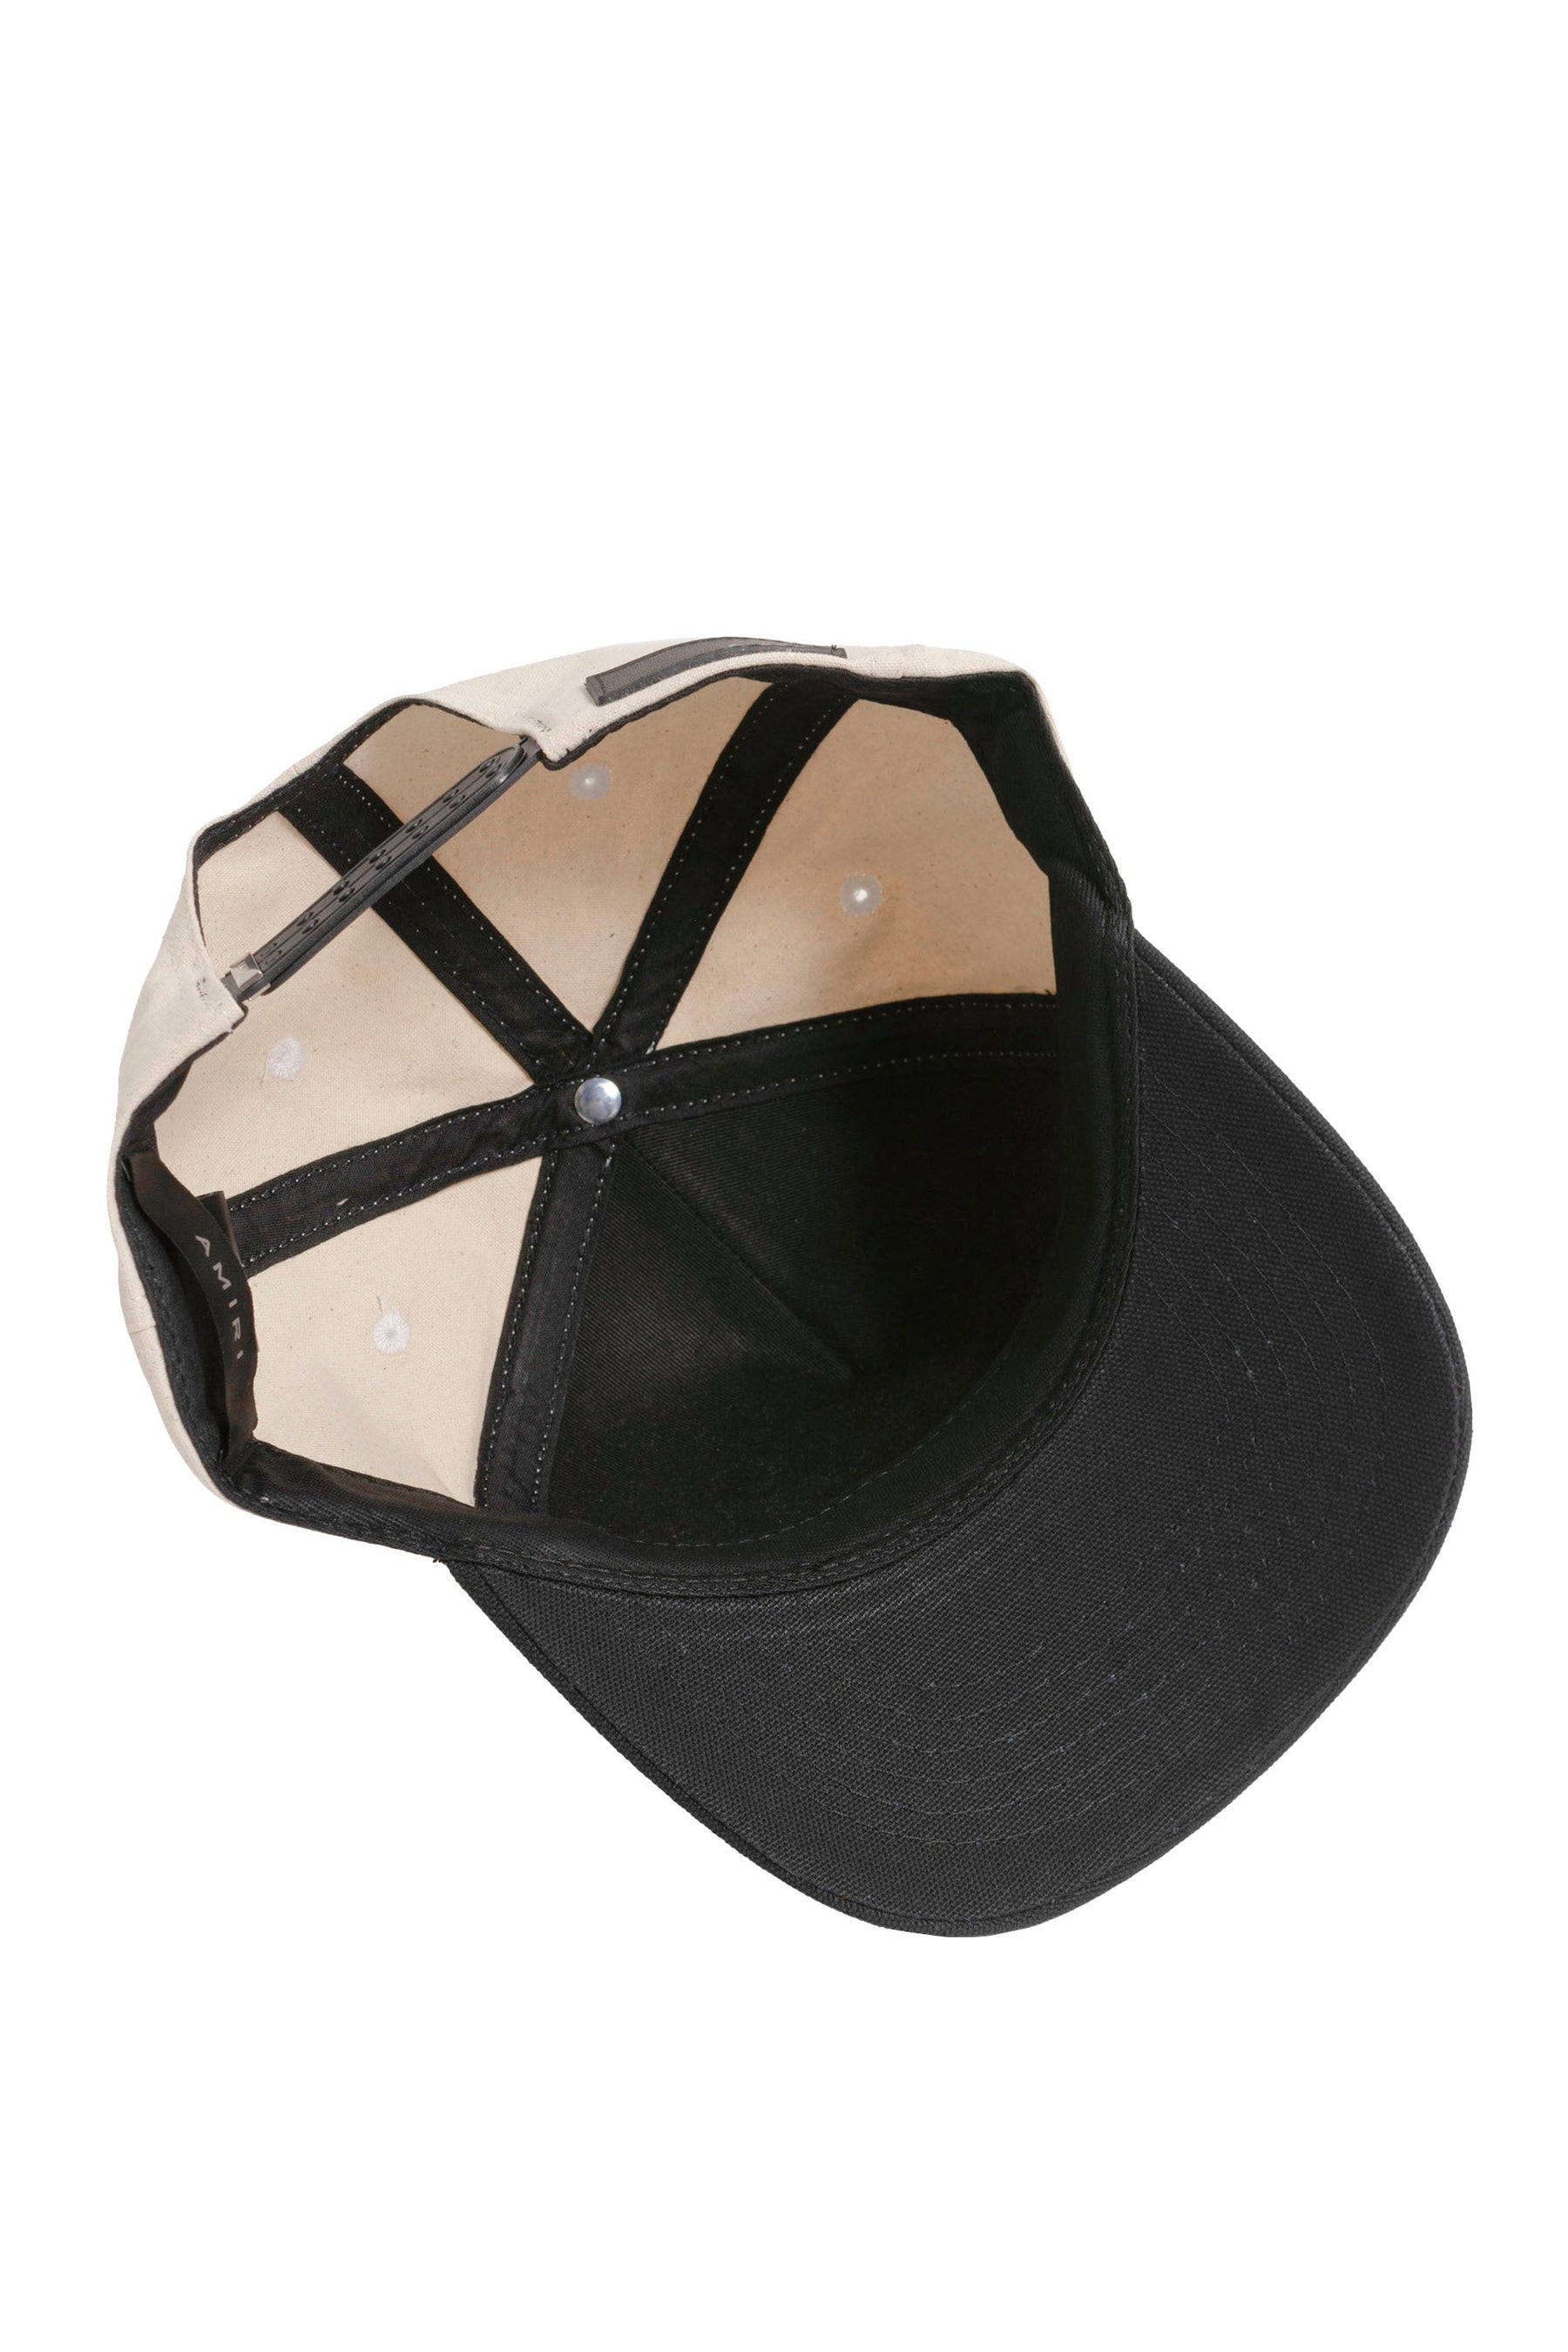 TWO TONE FULL CANVAS MA HAT / BLK